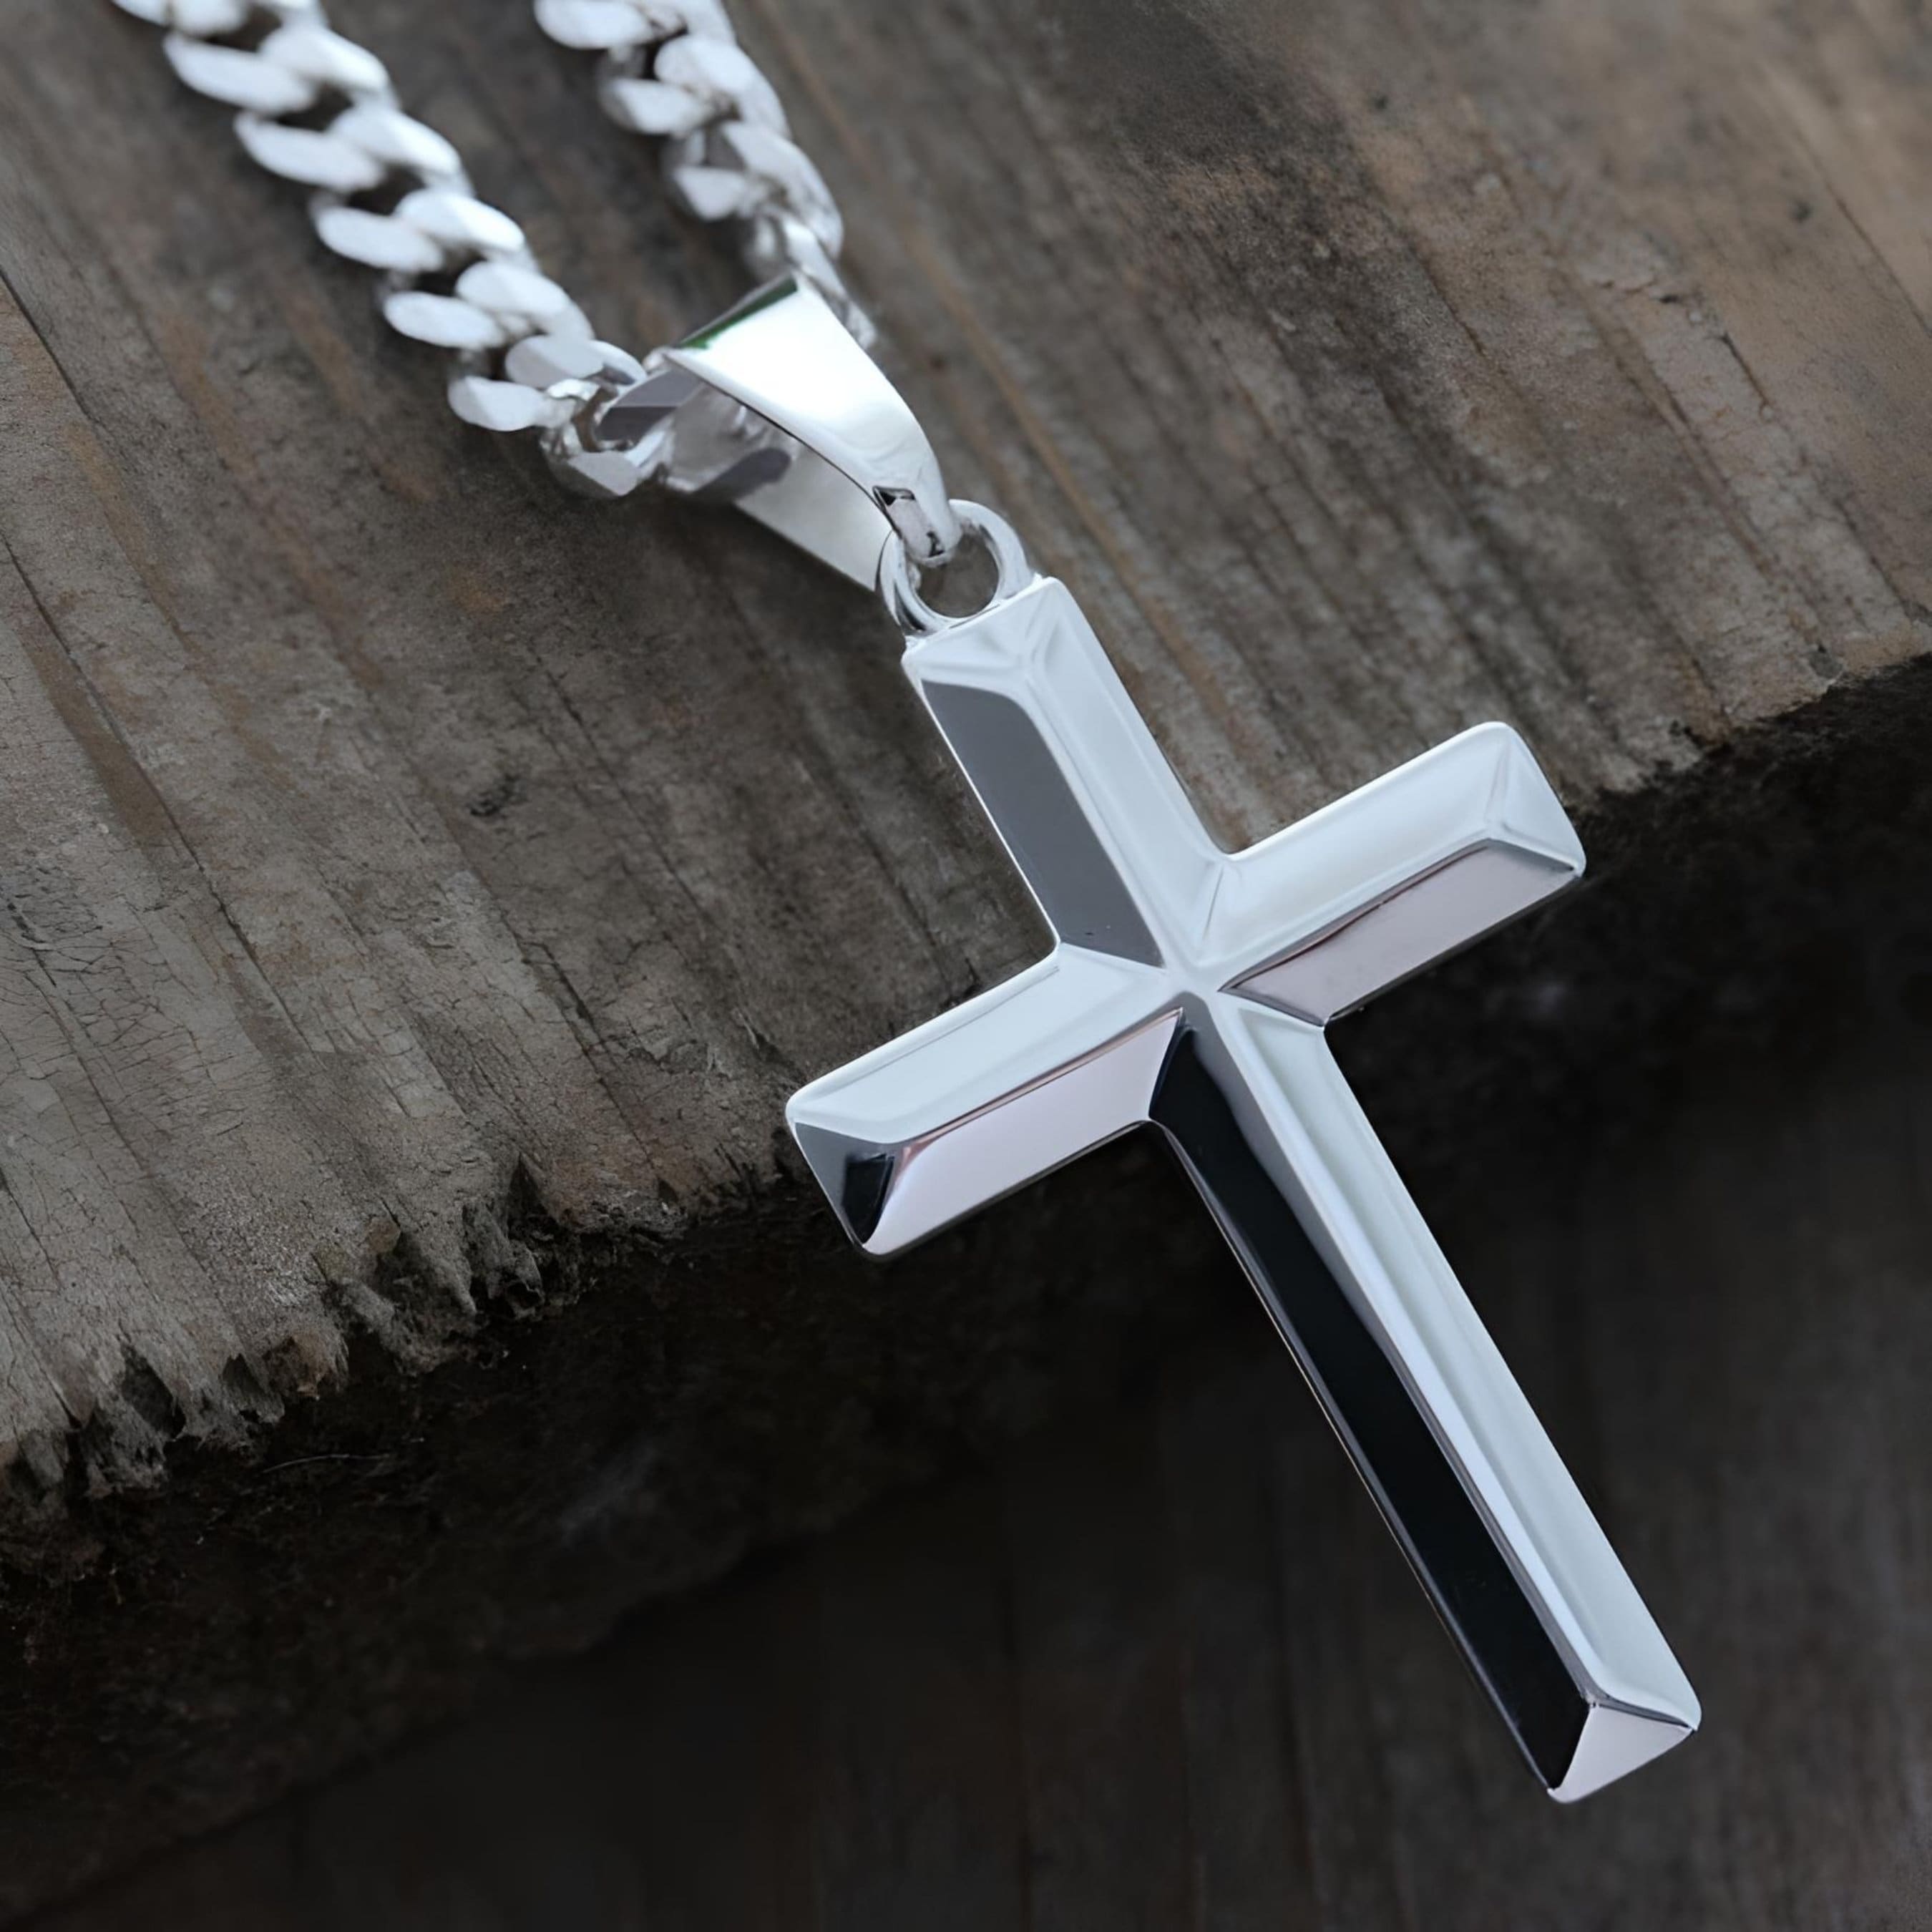 Rnivida Mens Sterling Silver Cross Pendant Necklace with 18 inch Chain, Silver  Cross Necklace for Men,Fine Jewelry for Men